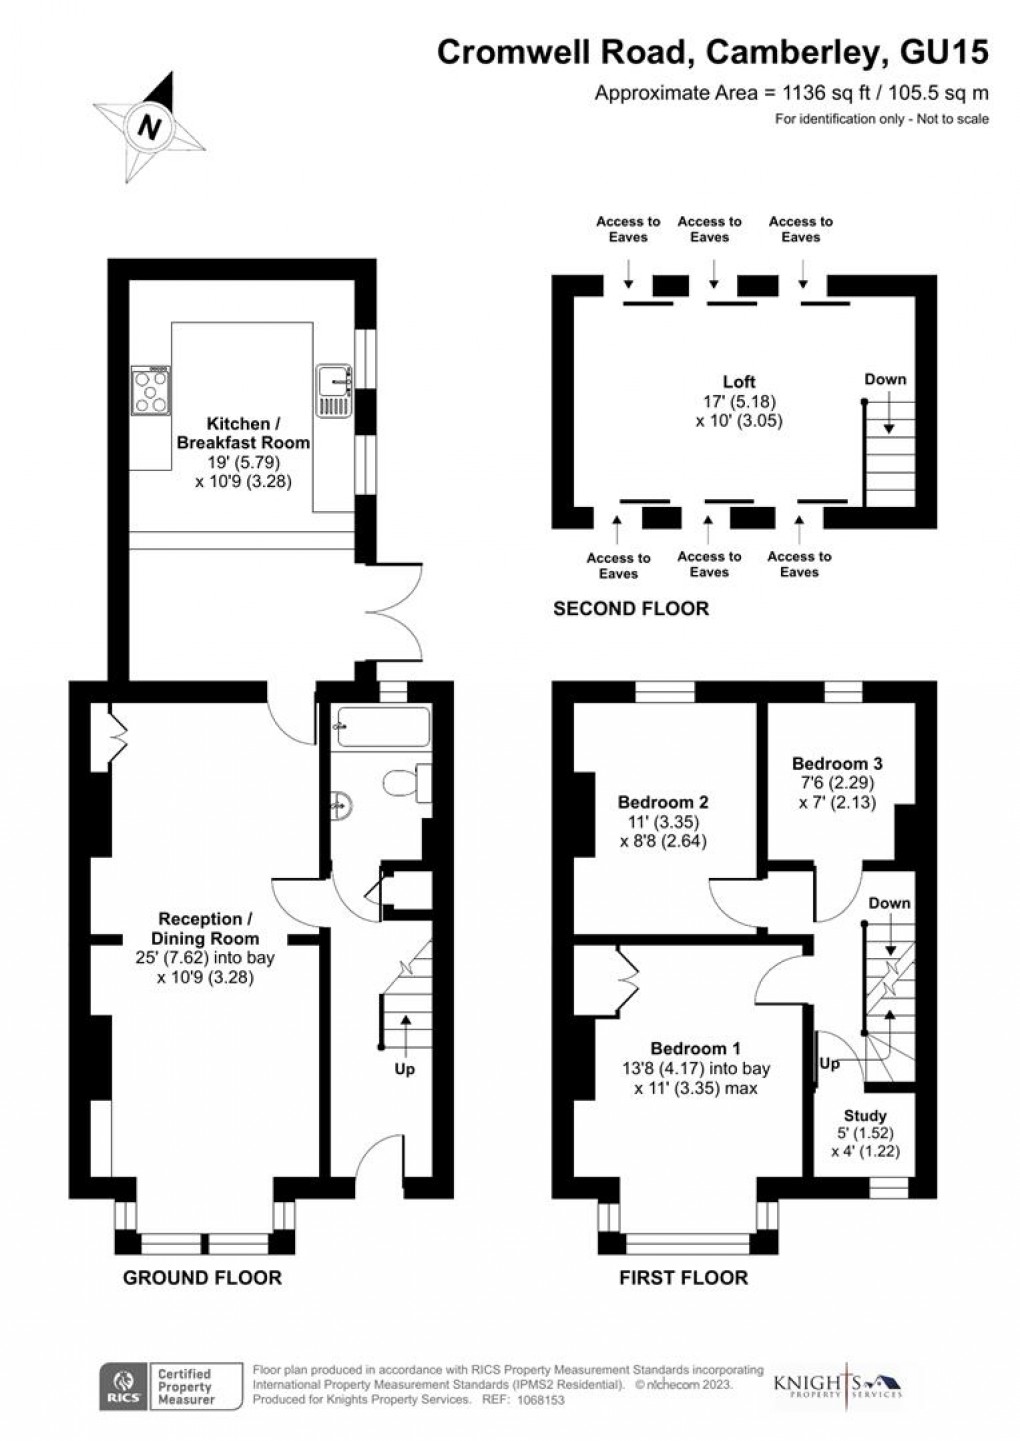 Floorplan for Cromwell Road, Camberley